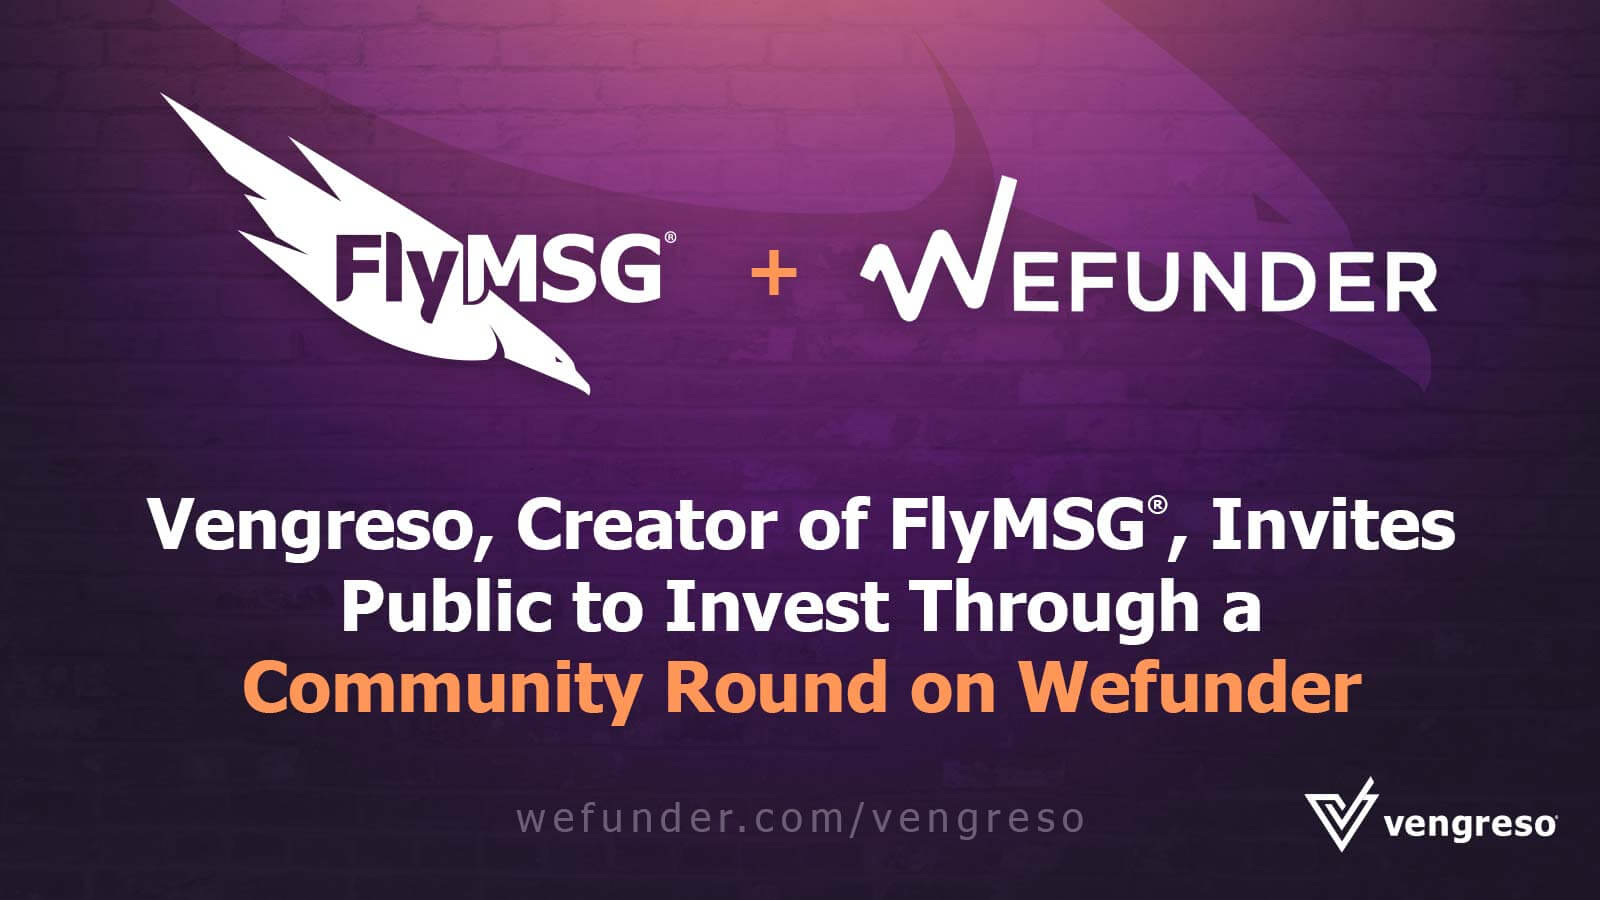 Venice, a minority & female-owned business and the creator of FlyMSG®, expands with a community round on Wefunder.